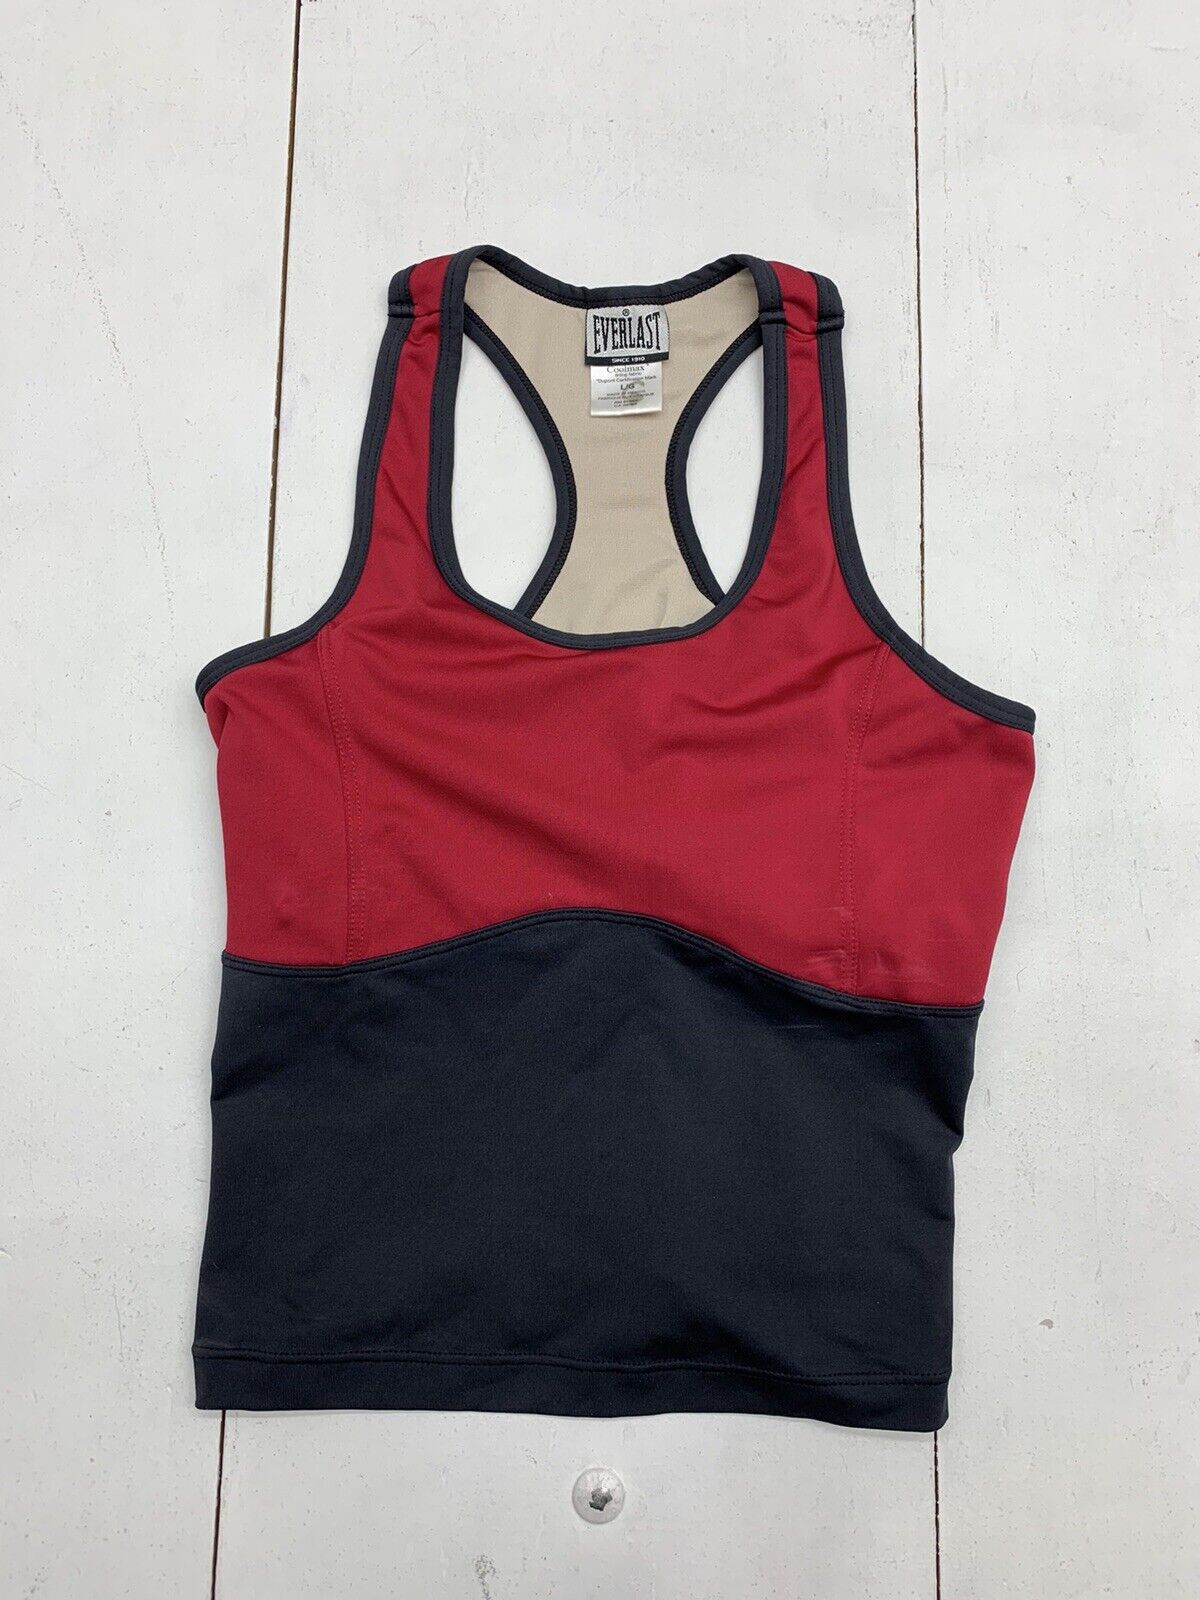 Everlast Womens Red Black Athletic Tank Size Large - beyond exchange